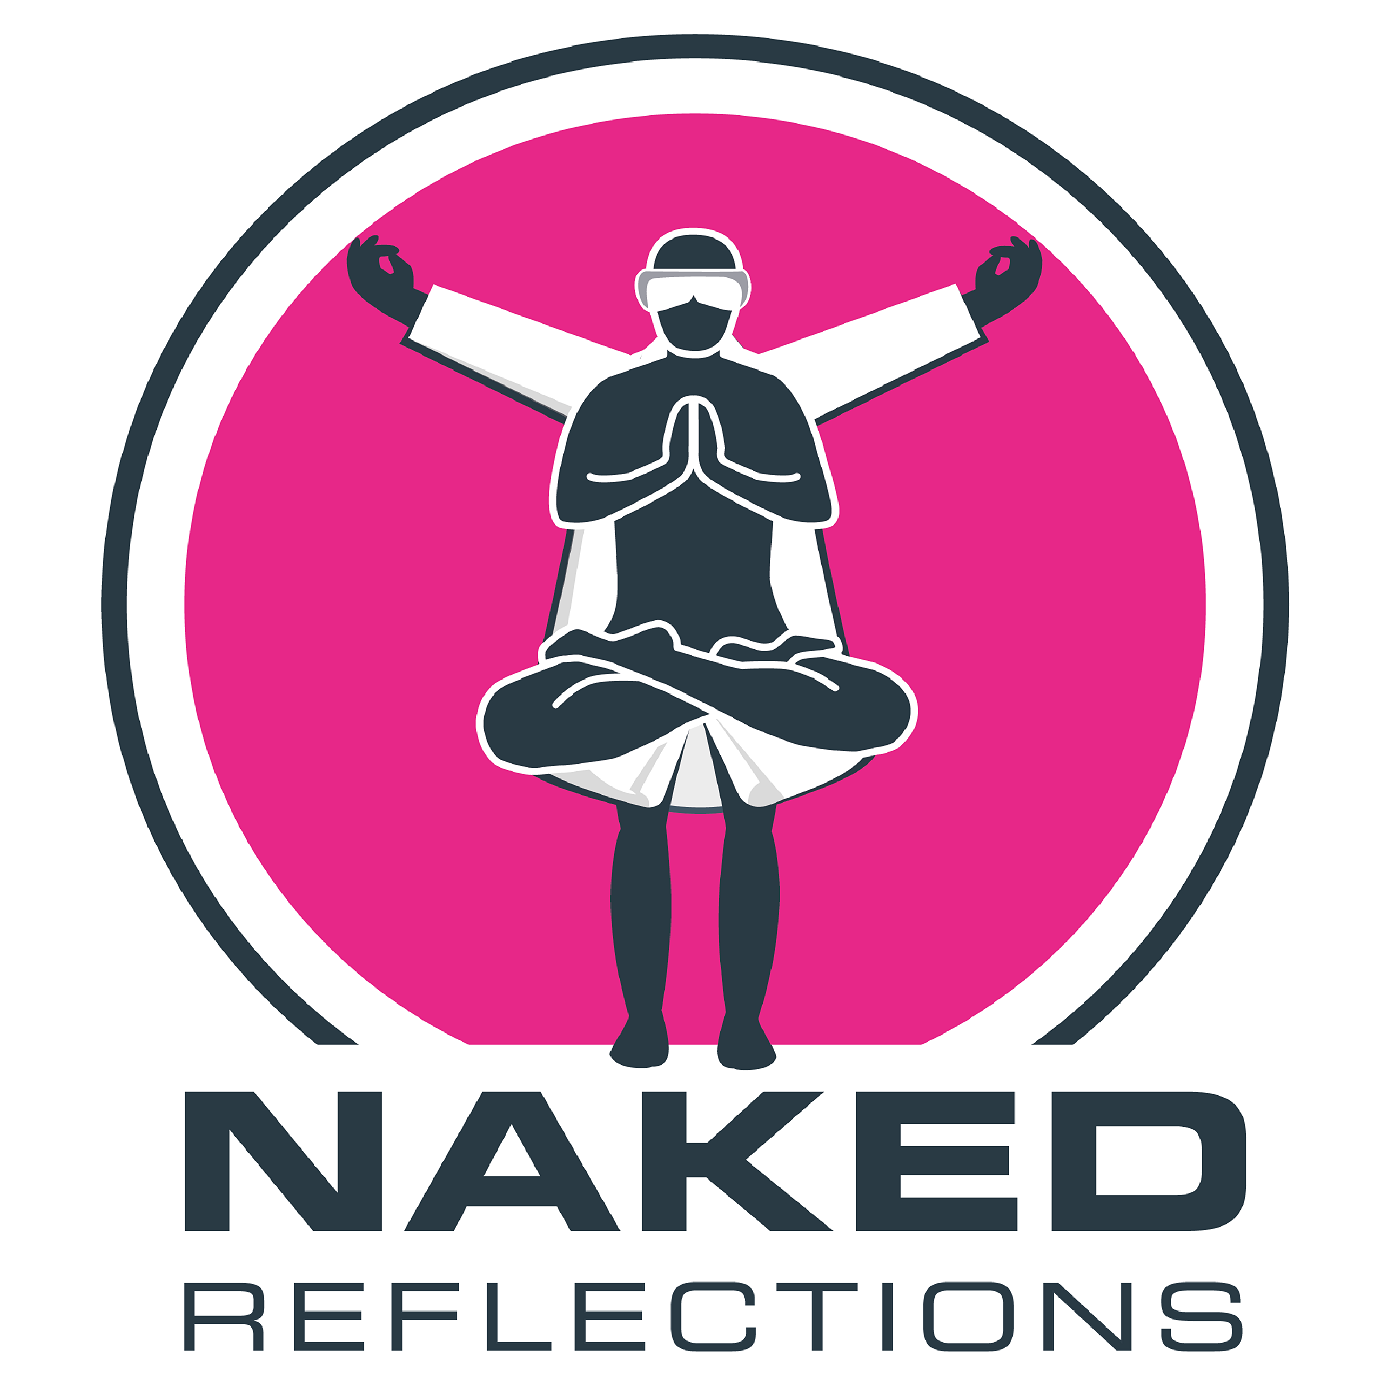 Naked Reflections, from the Naked Scientists